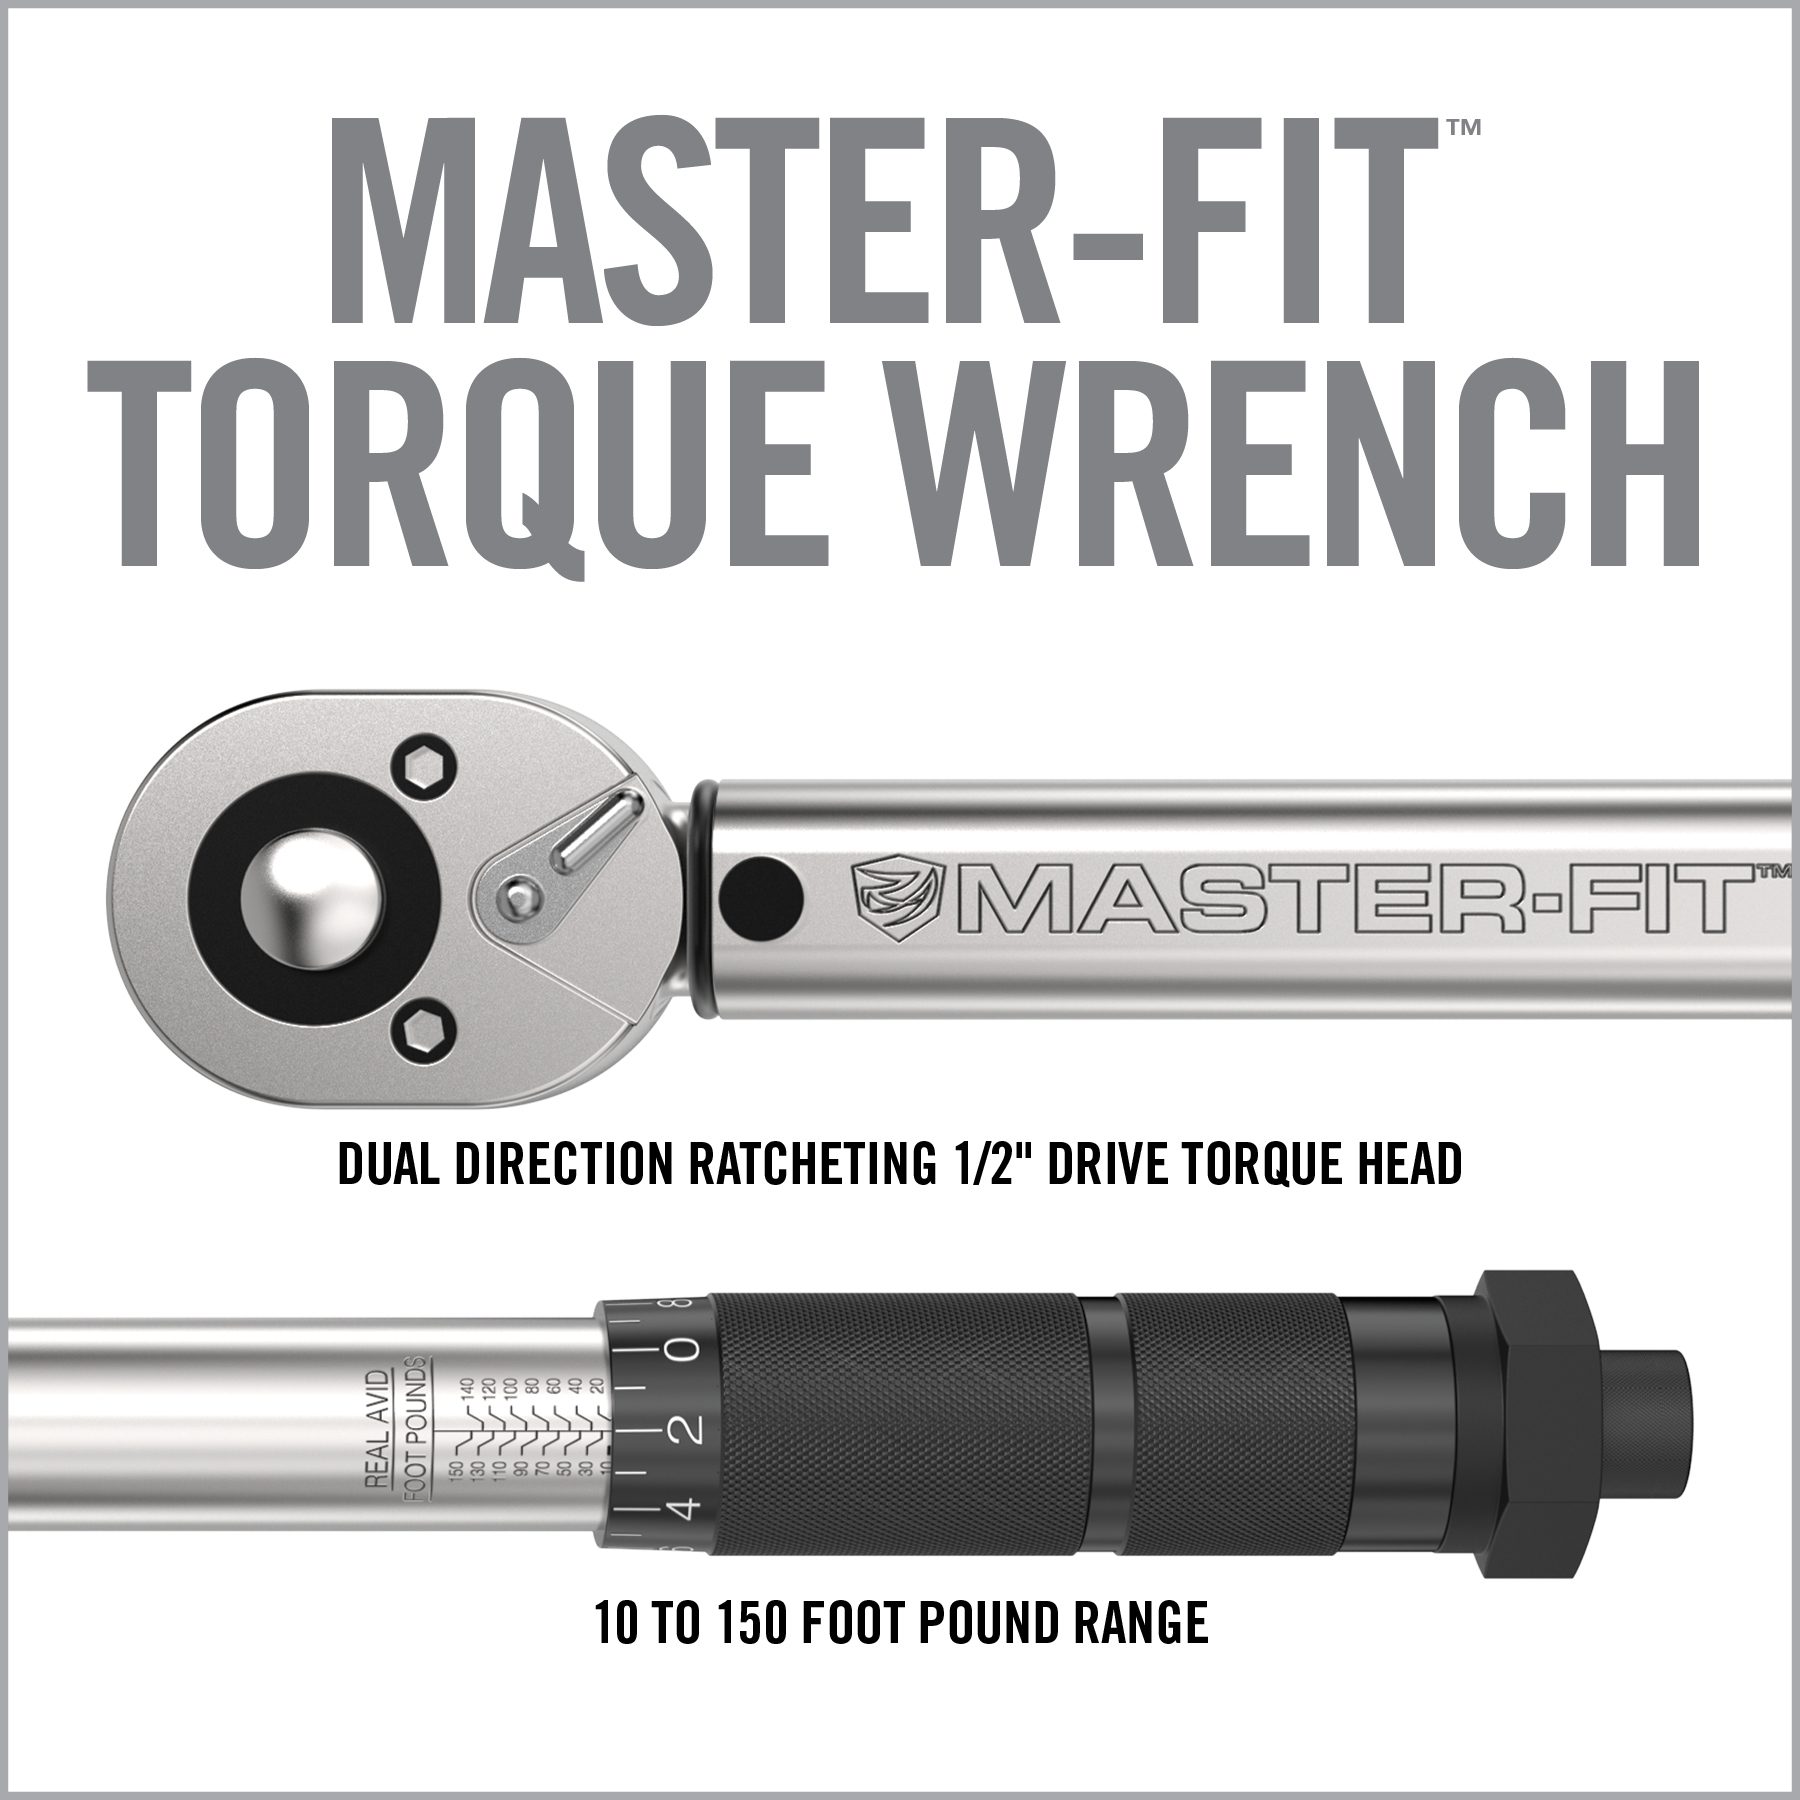 the master - fit torque wrench is shown with instructions